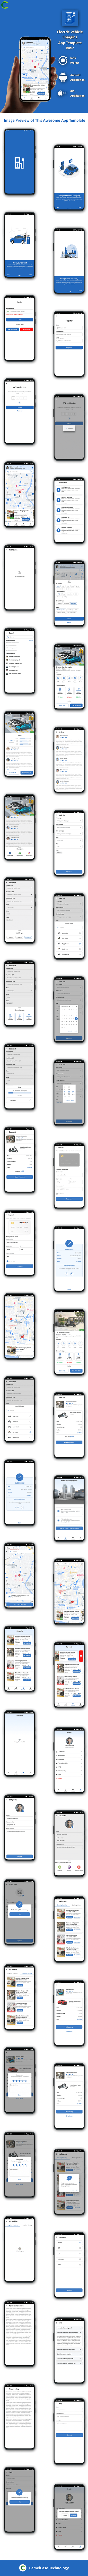 EV Charging Station App | Electric Vehicle Charging Spot App | Ionic 6 | SpeedCharge - 4